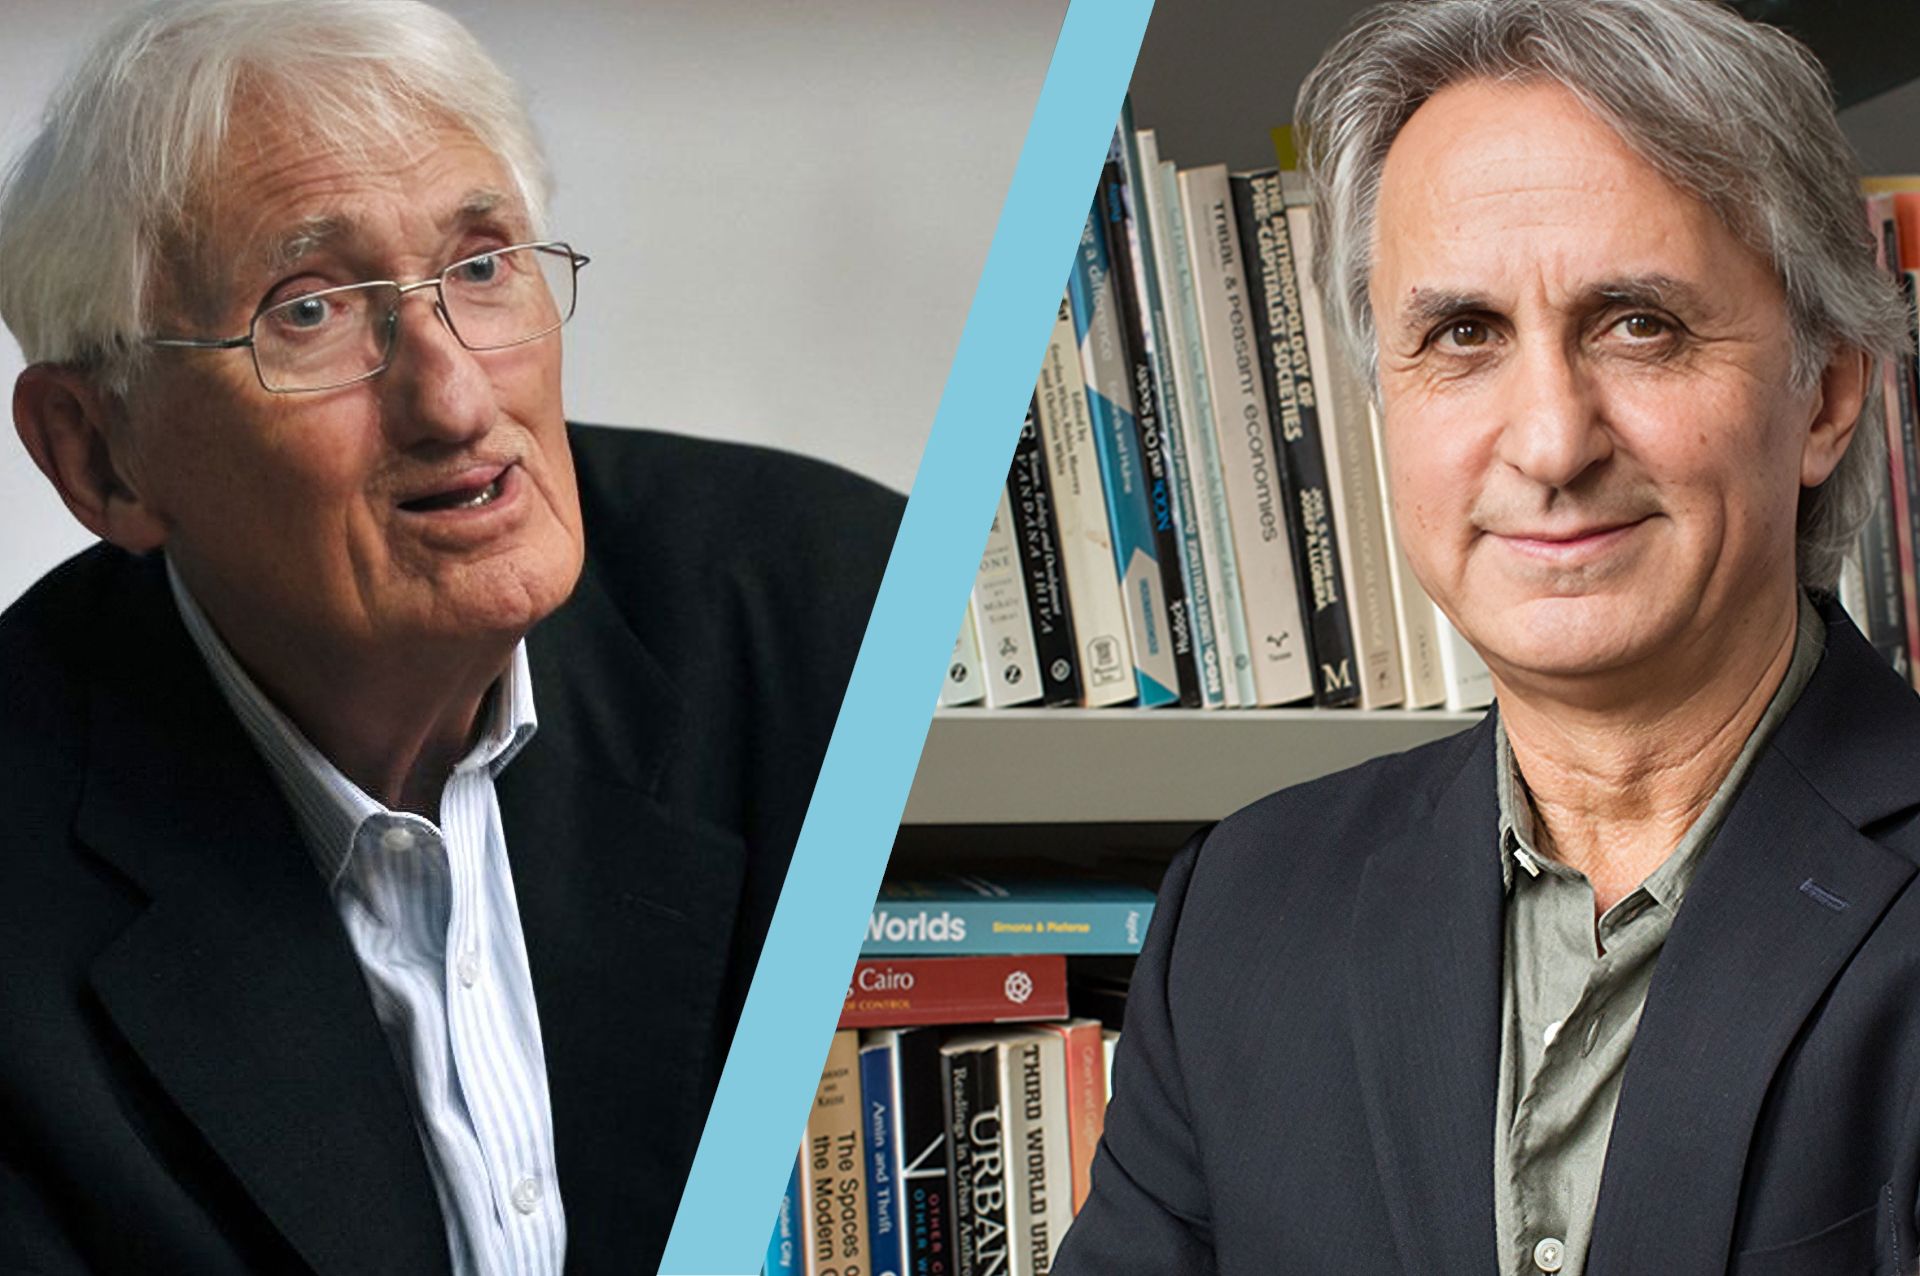 Juergen Habermas Contradicts His Own Ideas When It Comes to Gaza